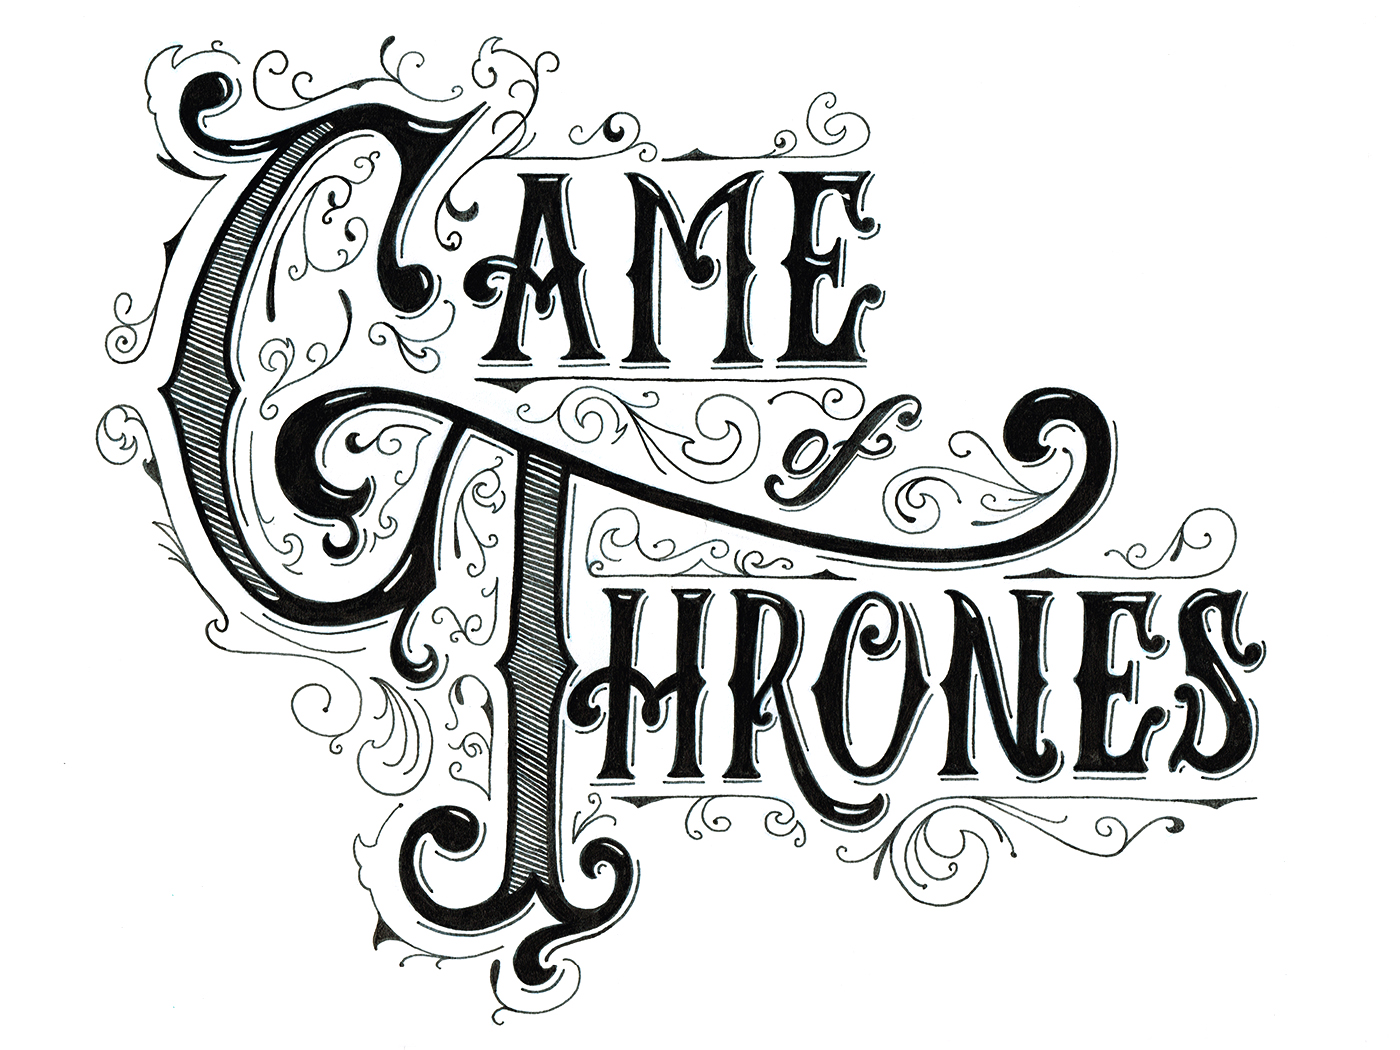 game of thrones quotes